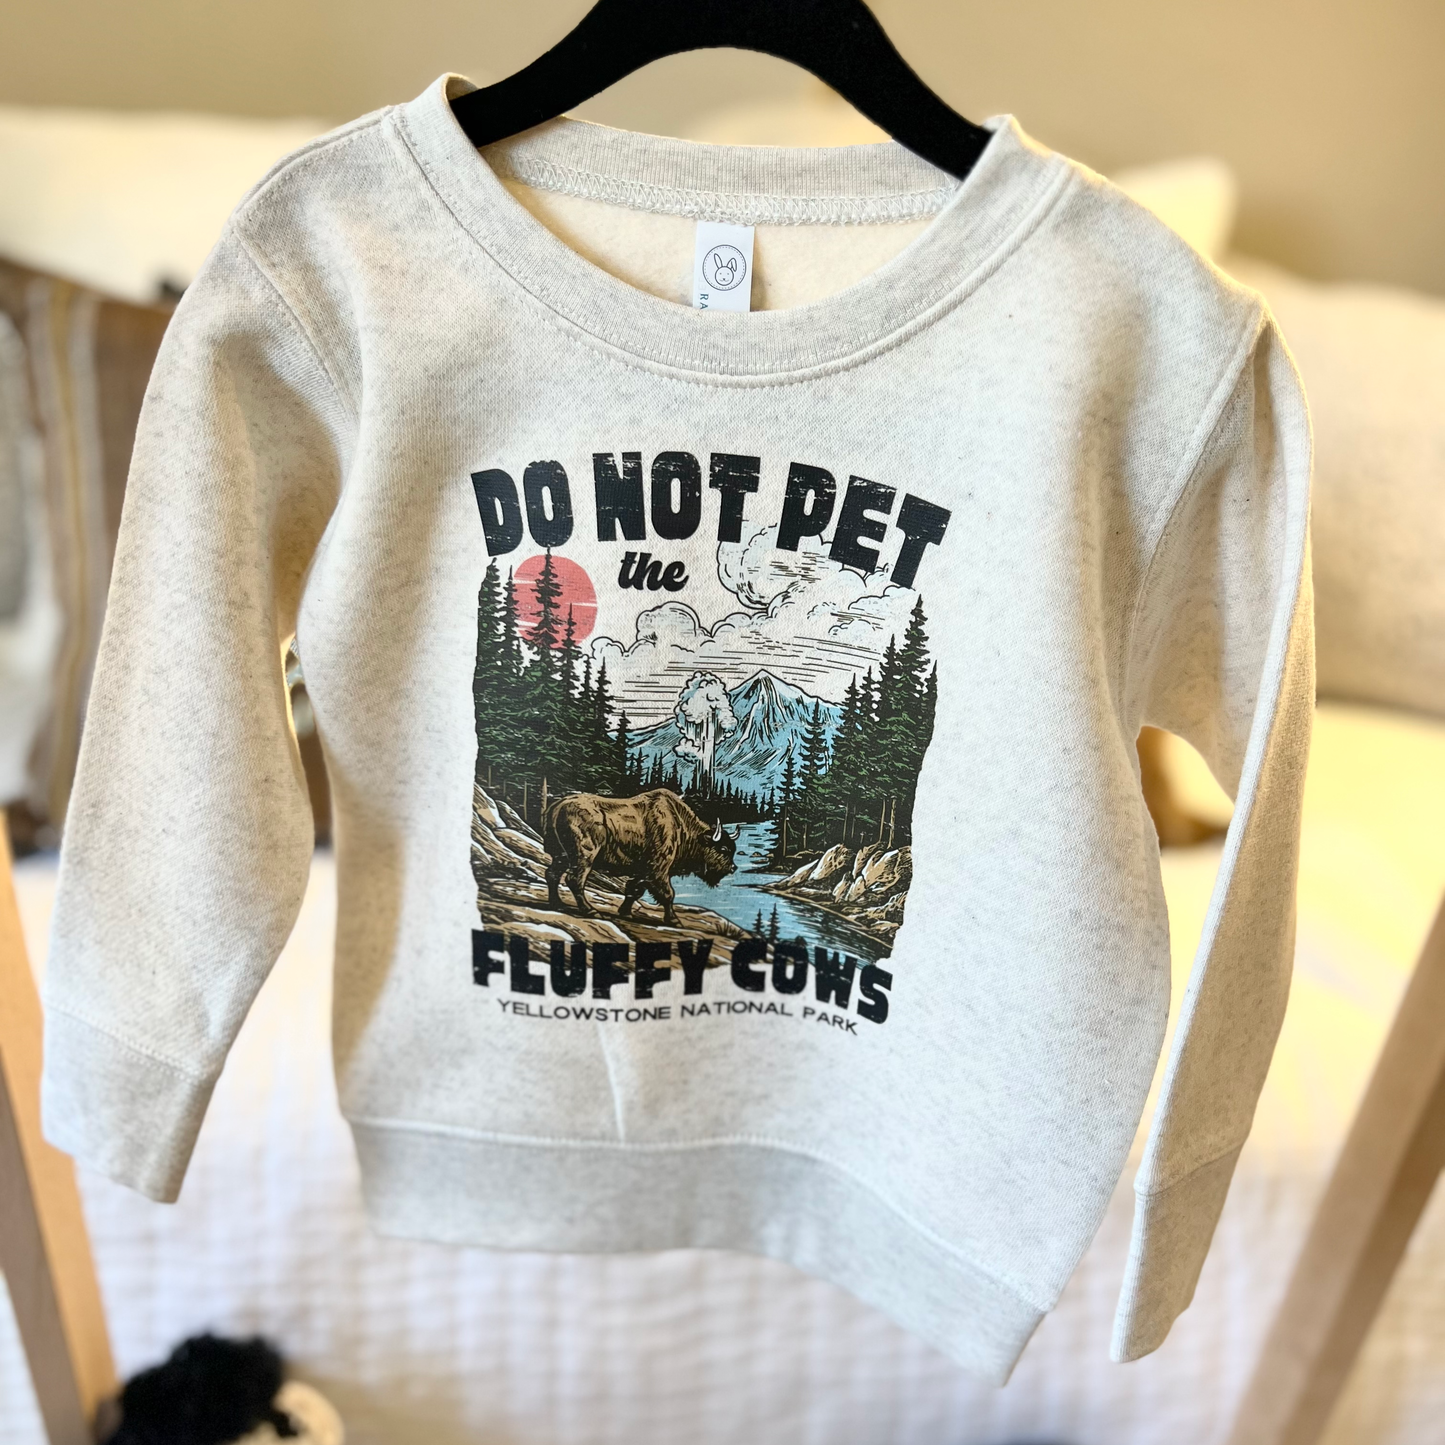 Natural heather toddler sweatshirt featuring the humorous phrase 'Do Not Put The Fluffy Cows'. Perfect for your little one's casual and playful wardrobe.